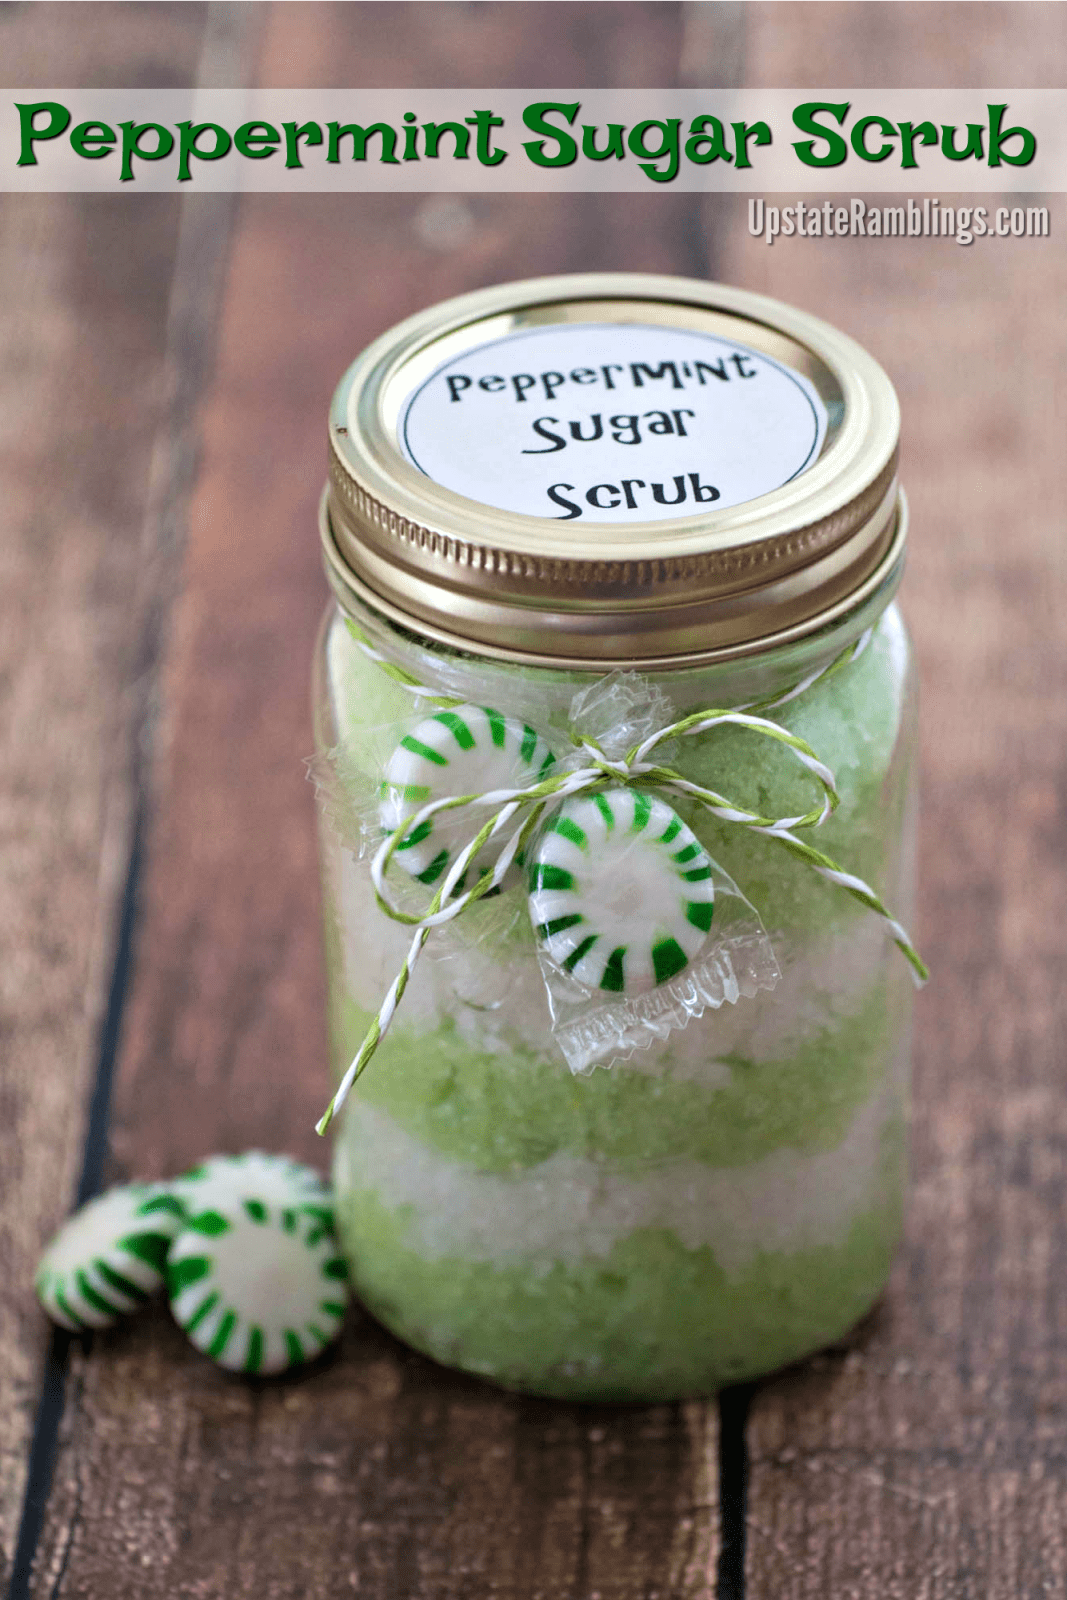 This Homemade Peppermint Sugar Scrub is a perfect DIY Beauty gift for someone who deserves pampering - great for the holidays. FREE printable labels included! Made with coconut oil and peppermint essential oil. #skincare #beauty #handmade #scrub